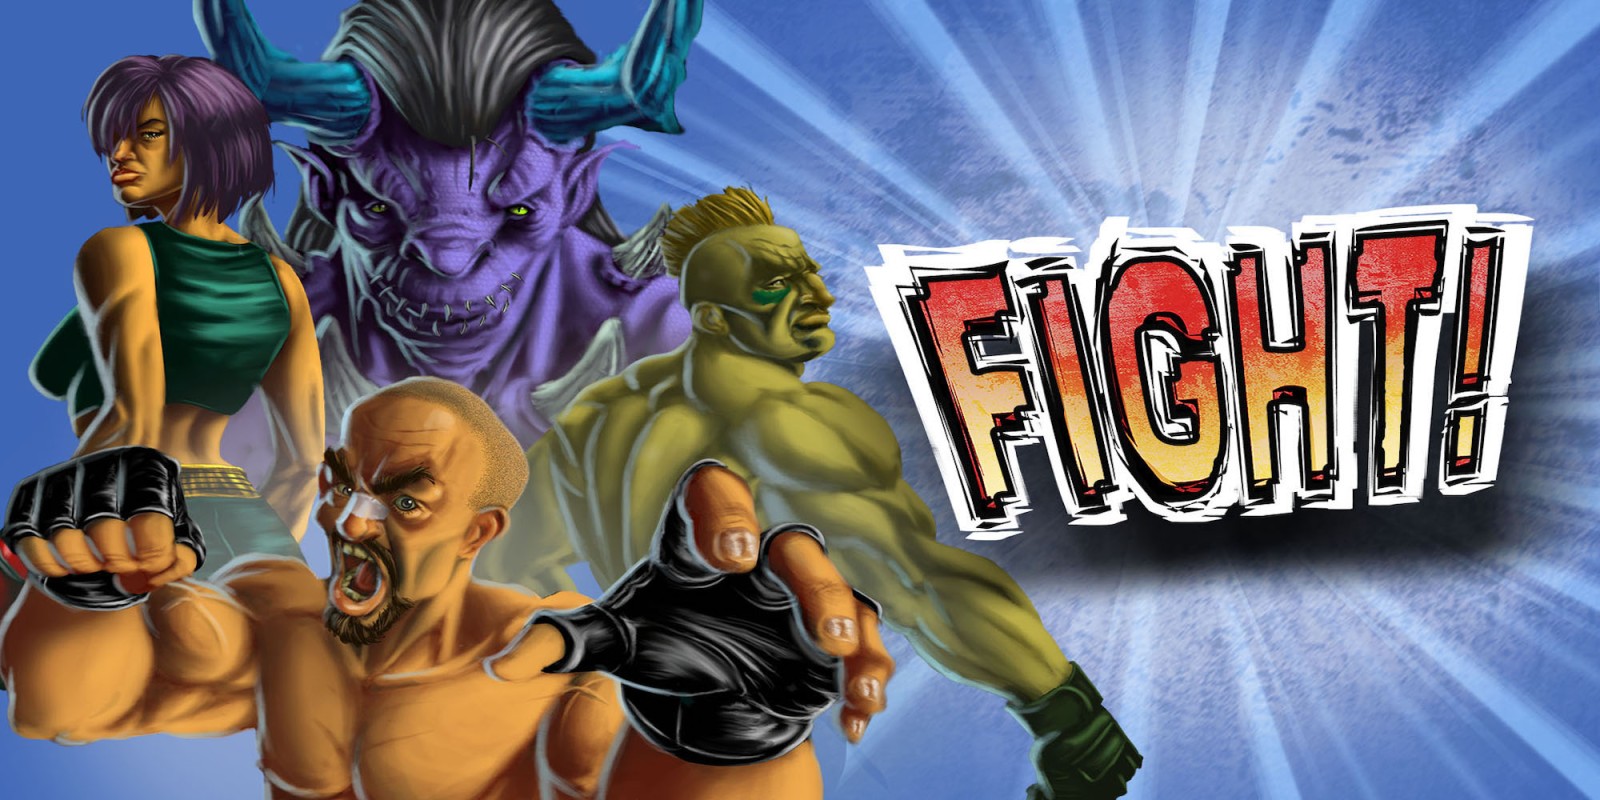 game fighting game download